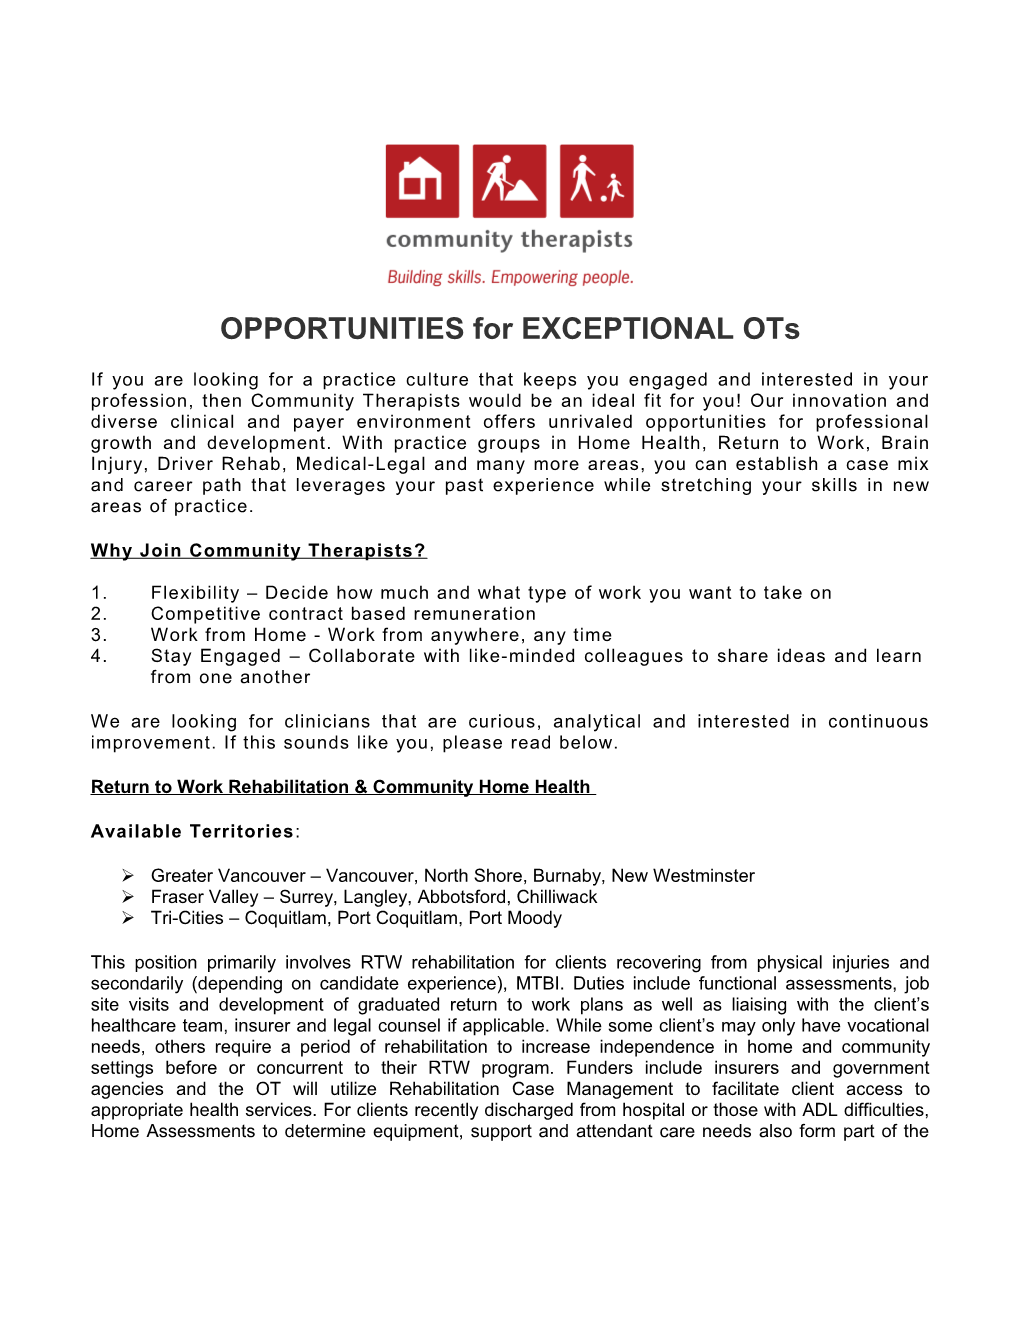 OPPORTUNITIES for EXCEPTIONAL Ots